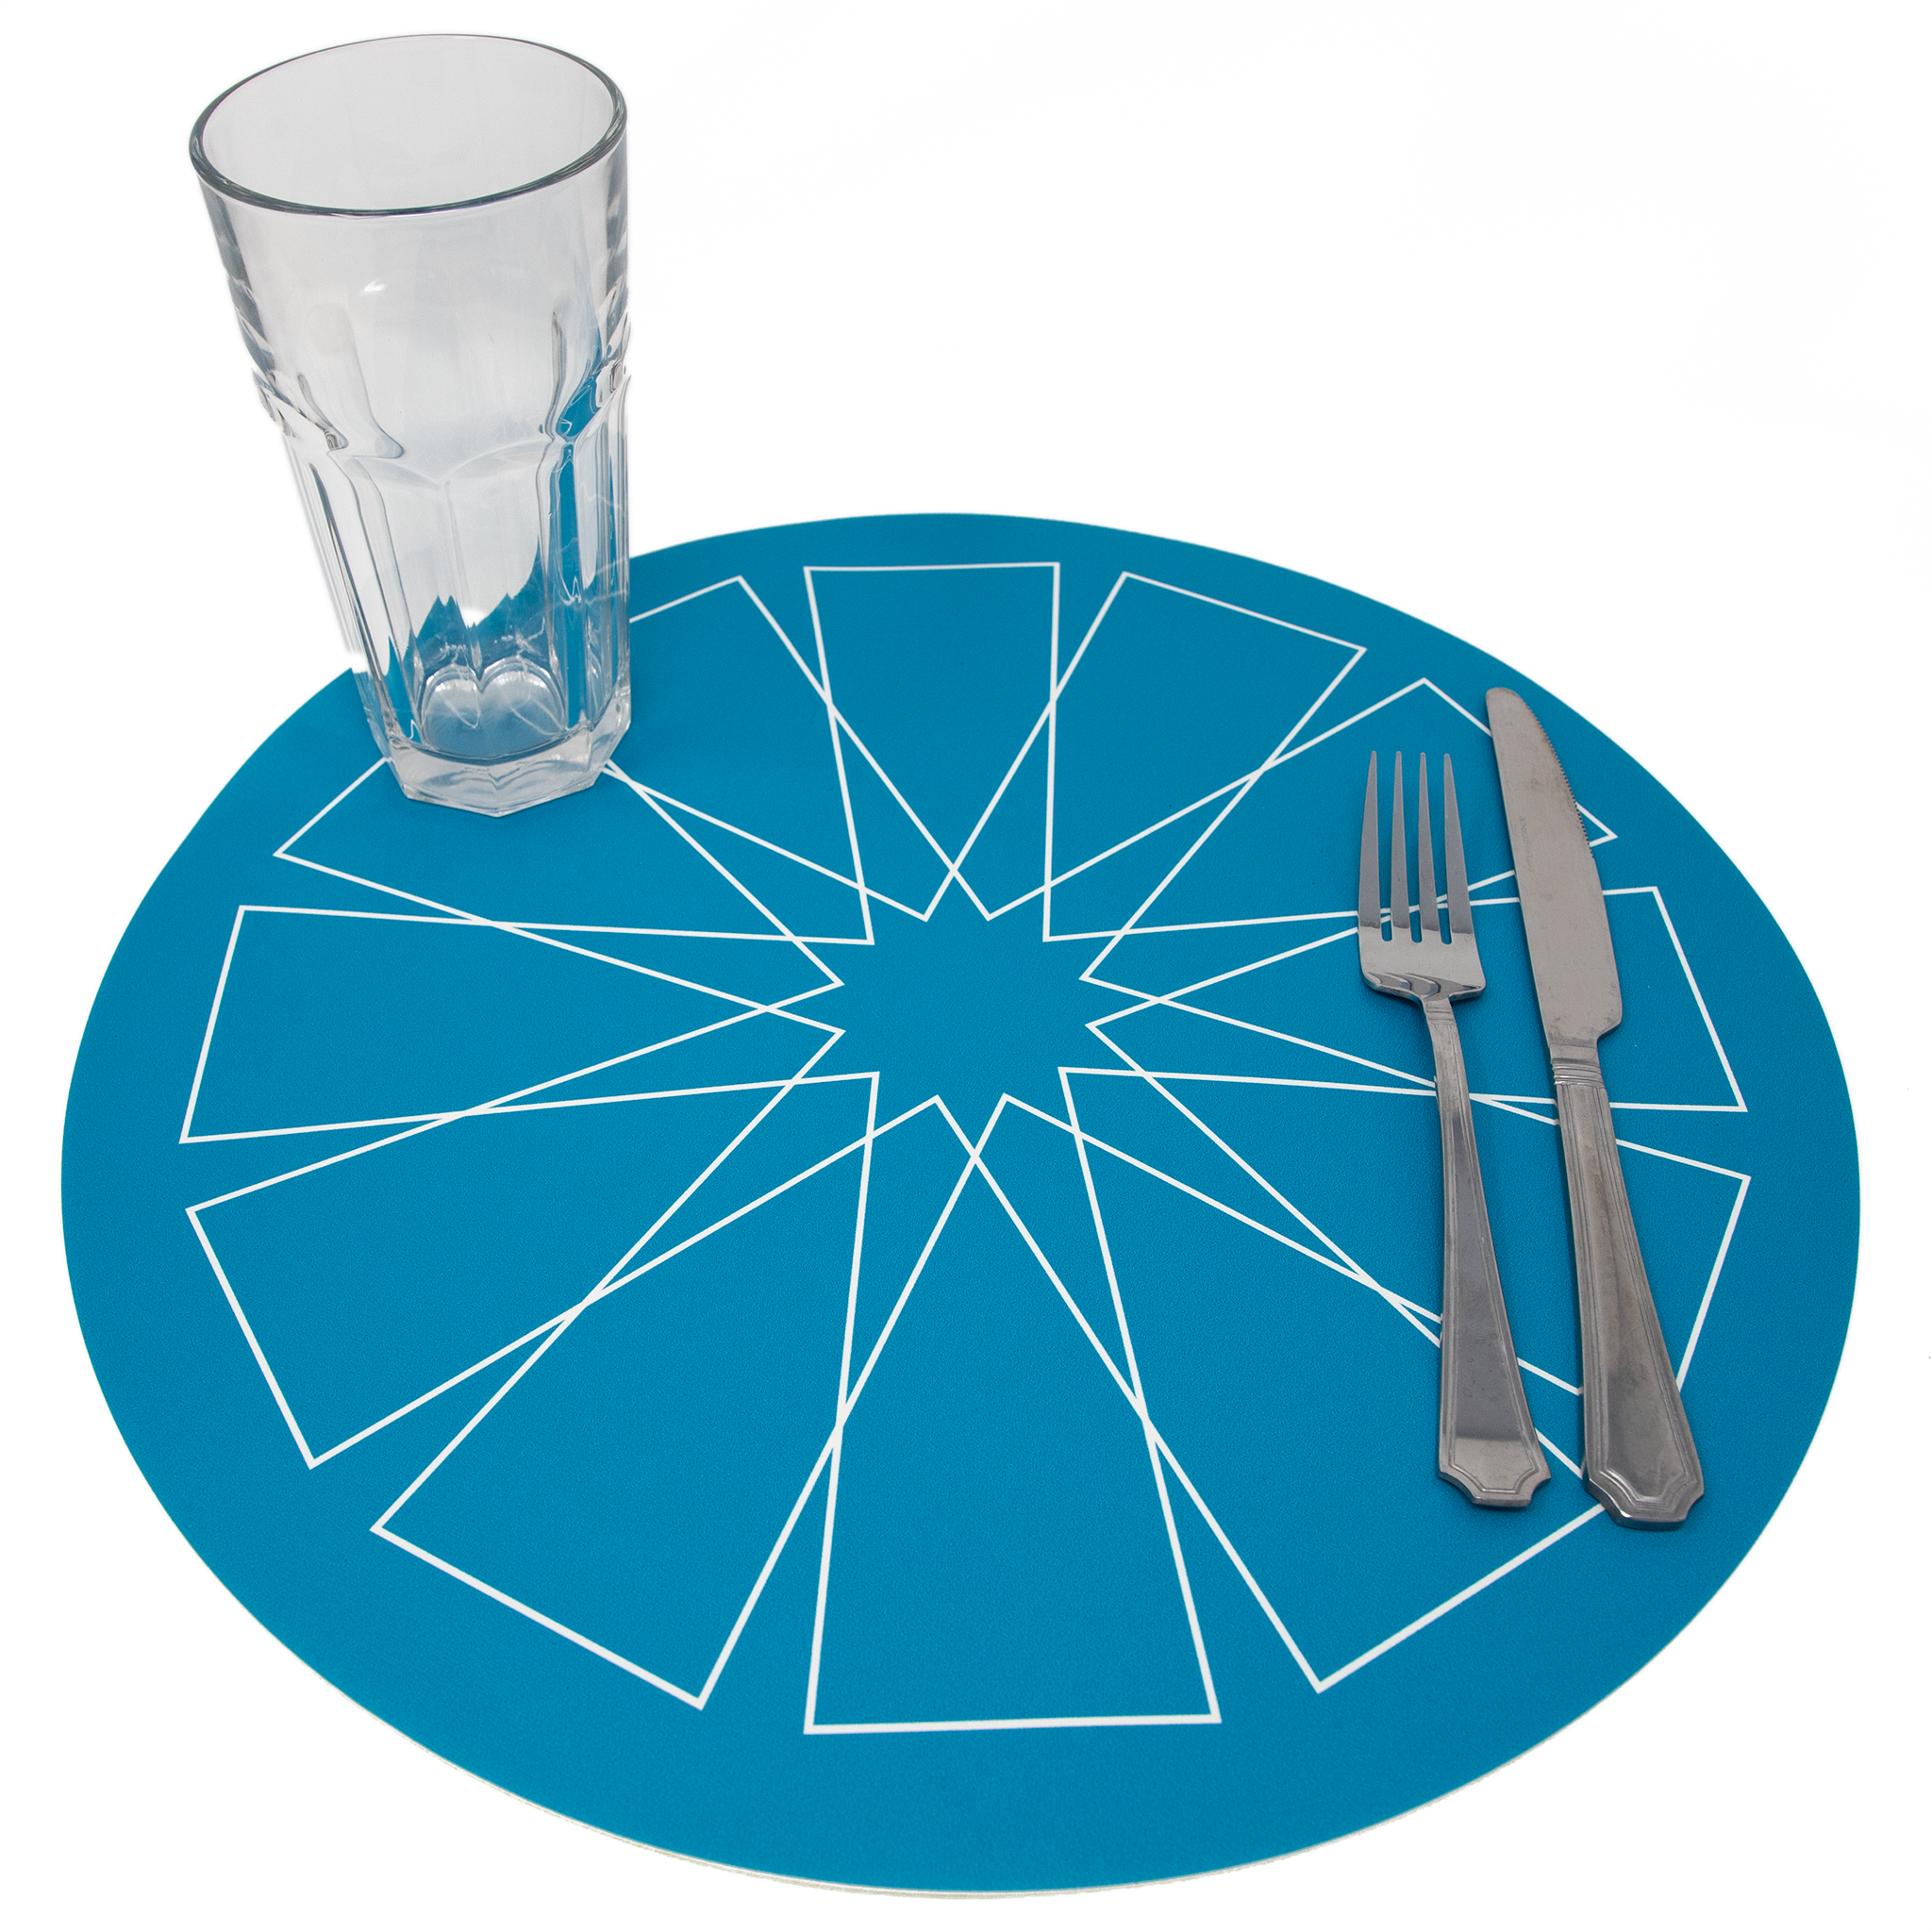 WheelBluePlacemat_e4a644aa-3354-4f02-a734-607d13c2b649.png